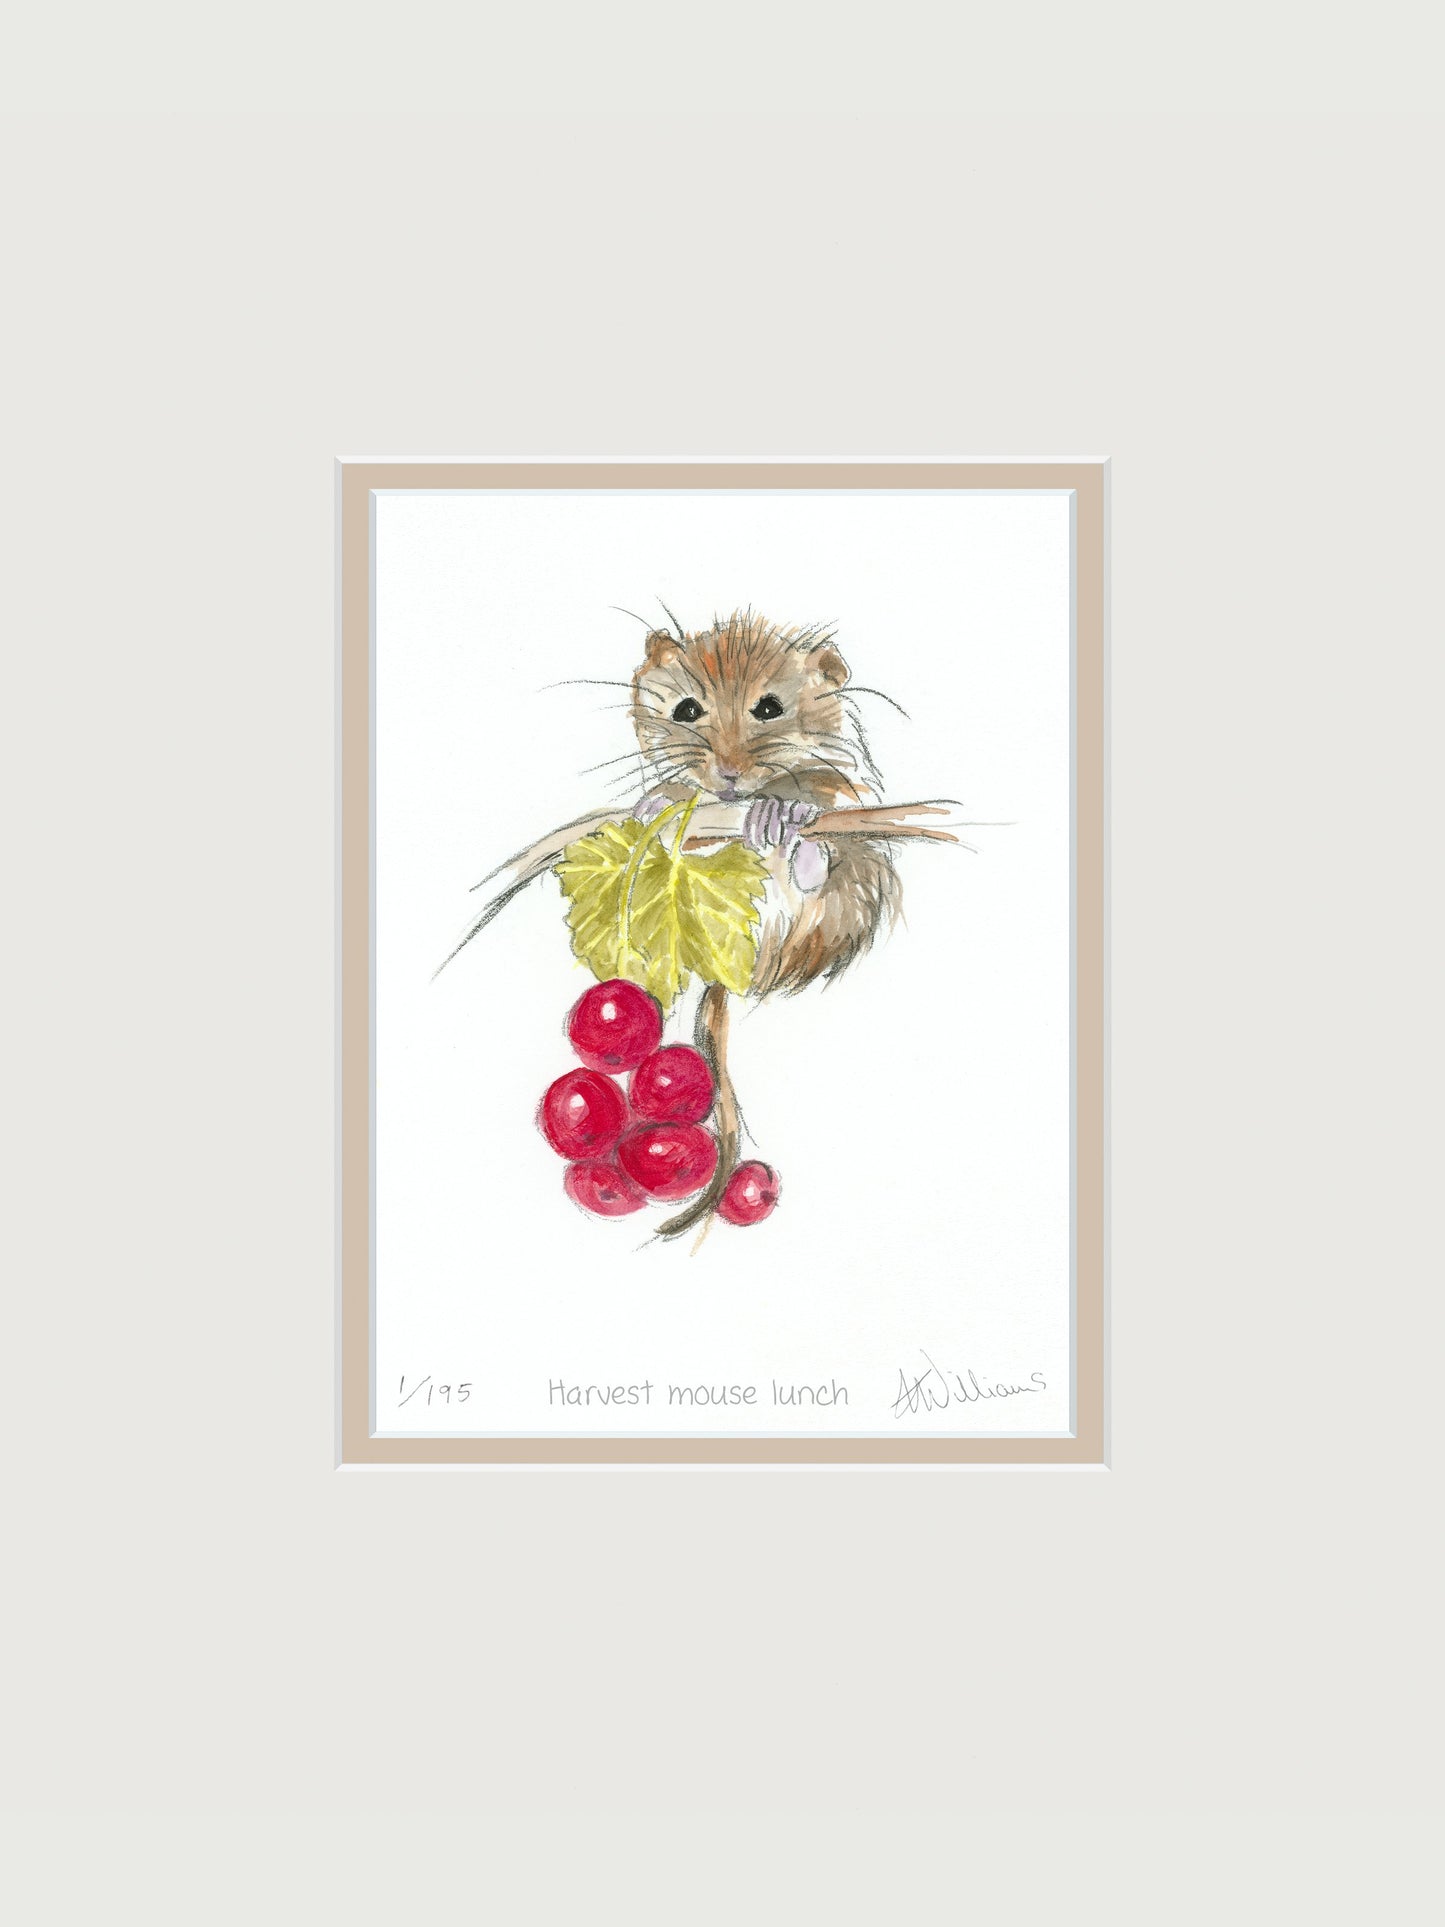 'Harvest mouse lunch' - limited edition